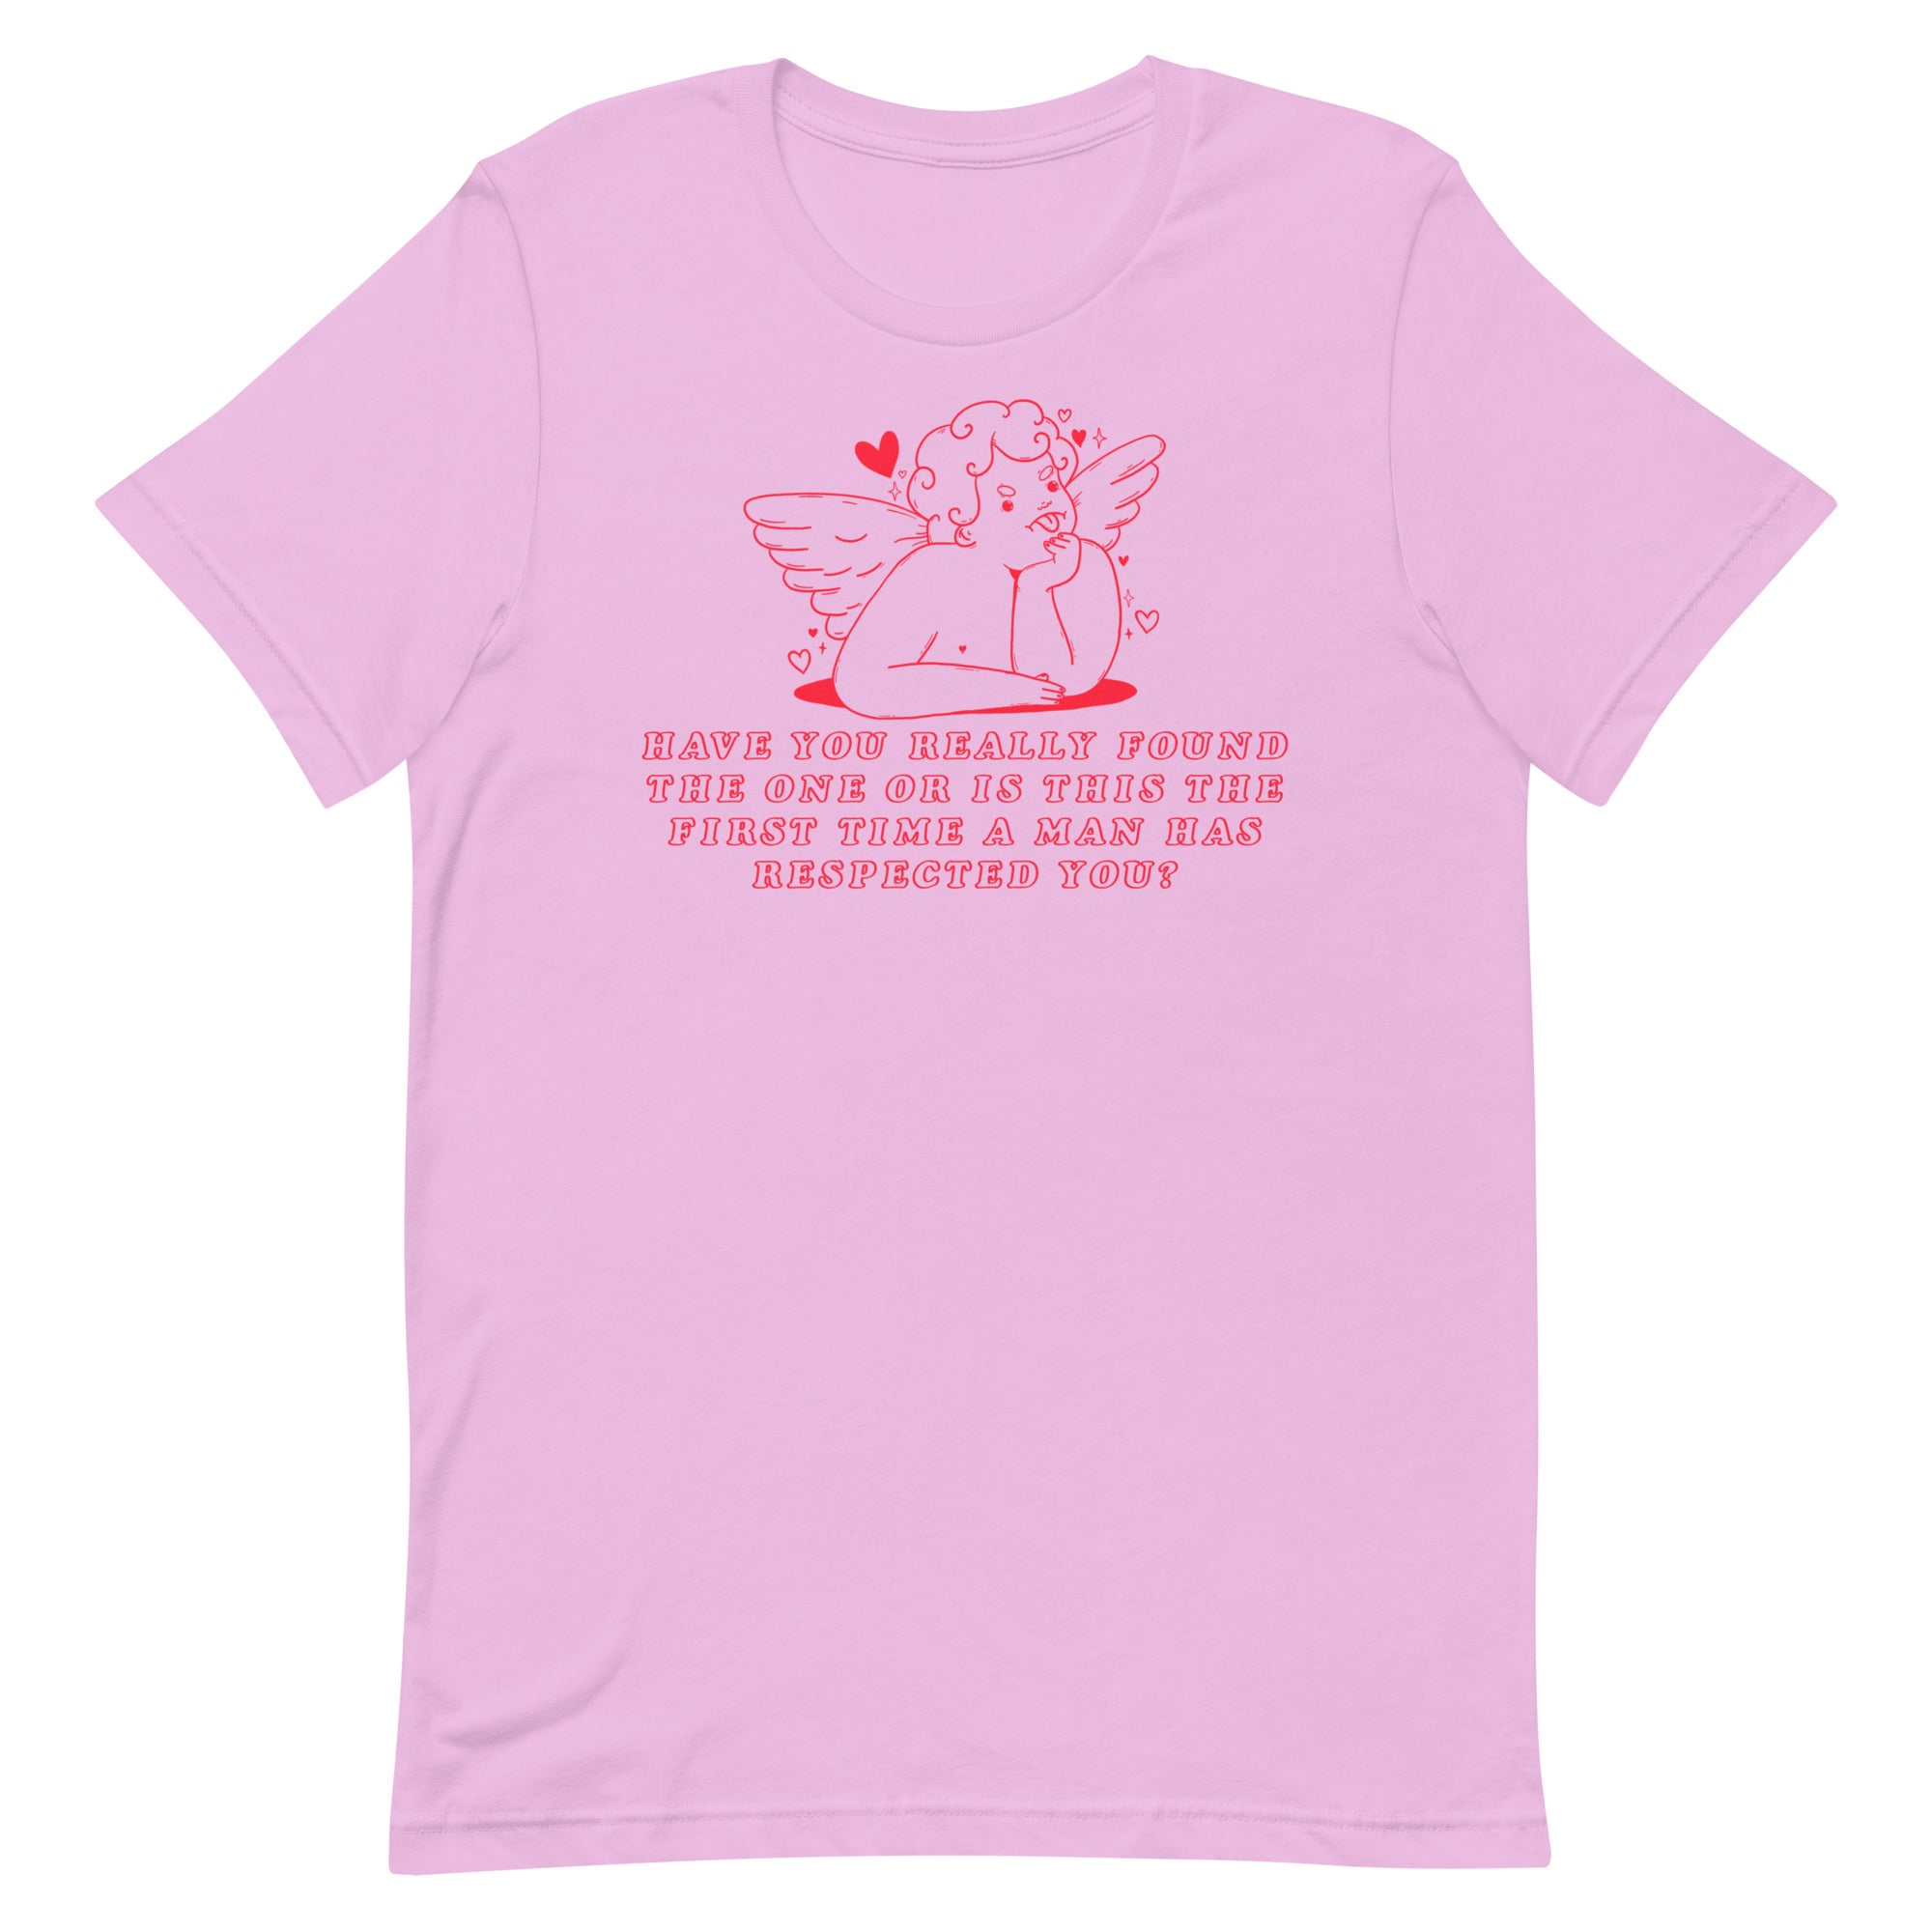 Have You Really Found The One? Unisex Feminist T-shirt - Shop Women’s Rights T-shirts - Feminist Trash Store - Lilac